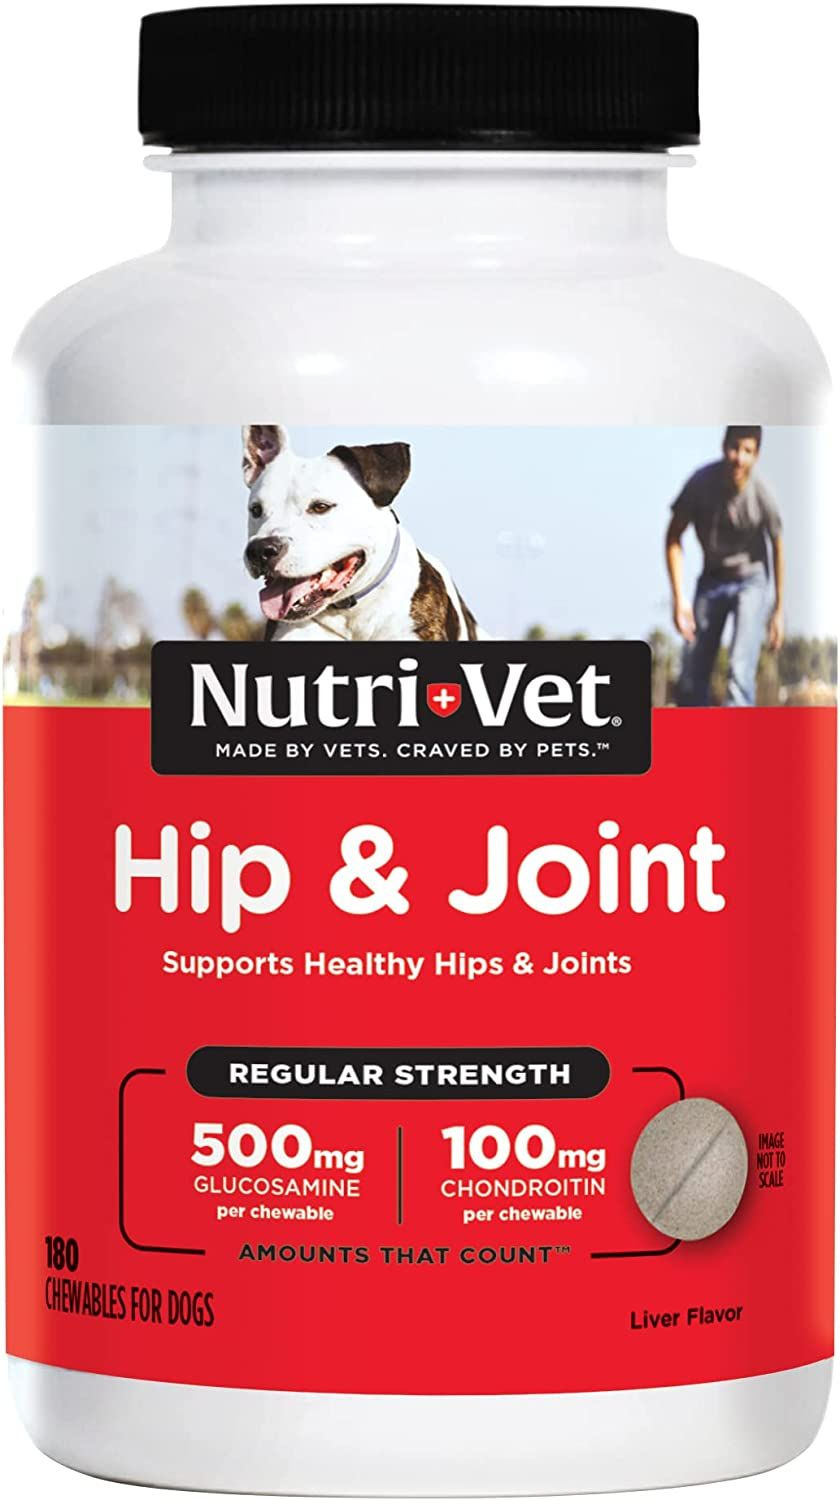 Nutri-Vet Hip & Joint Chewable Dog Supplements | Formulated with Glucosamine... 